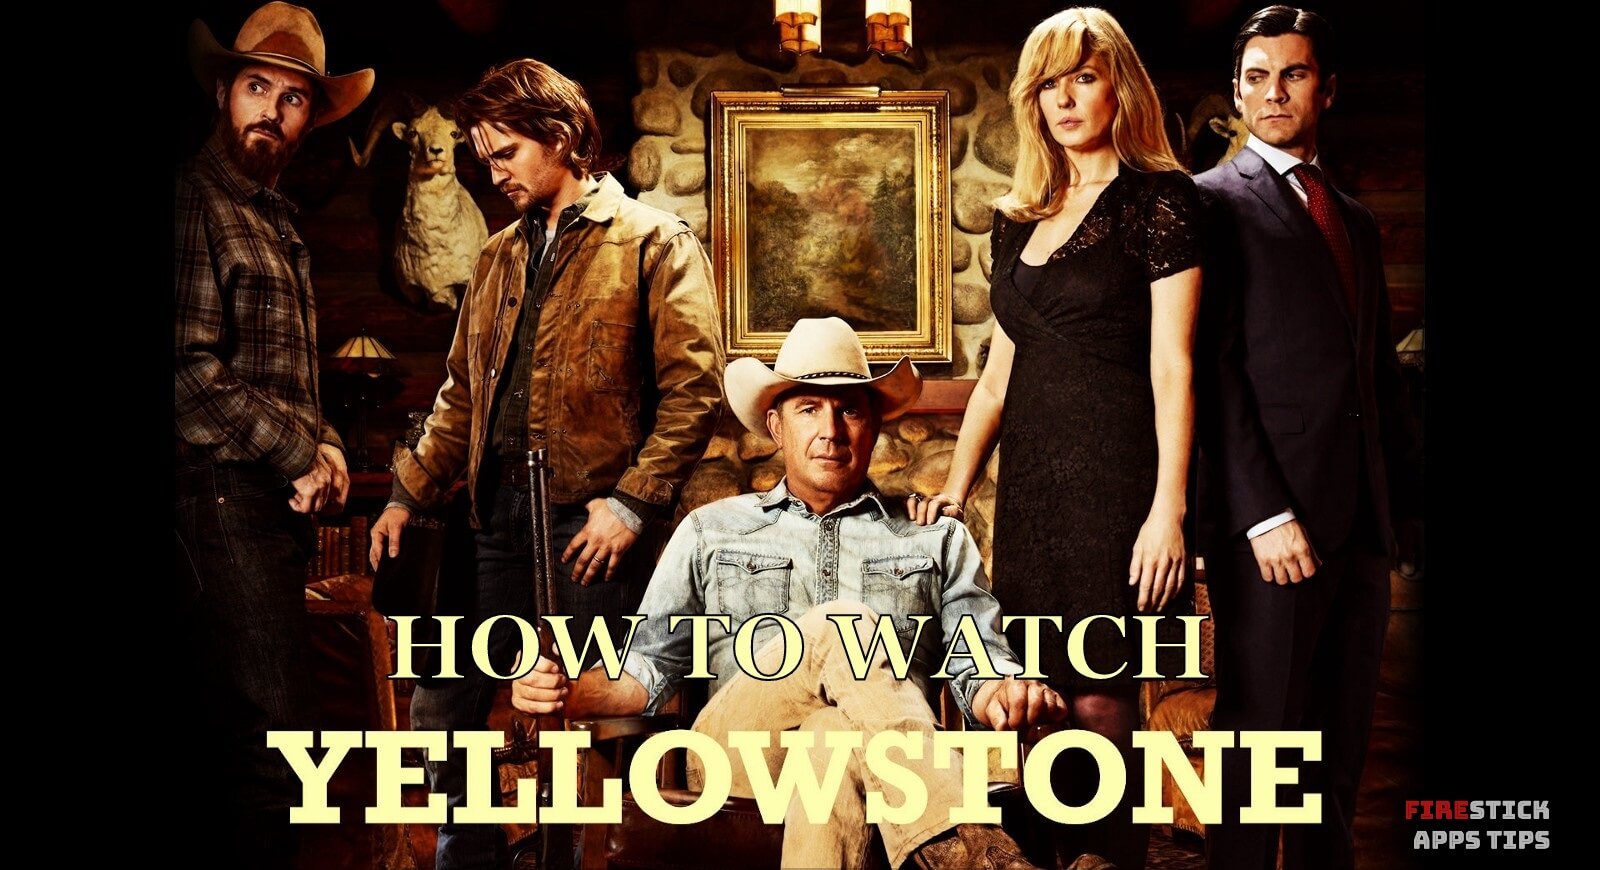 How To Watch Yellowstone Season 2 For FREE on Firestick